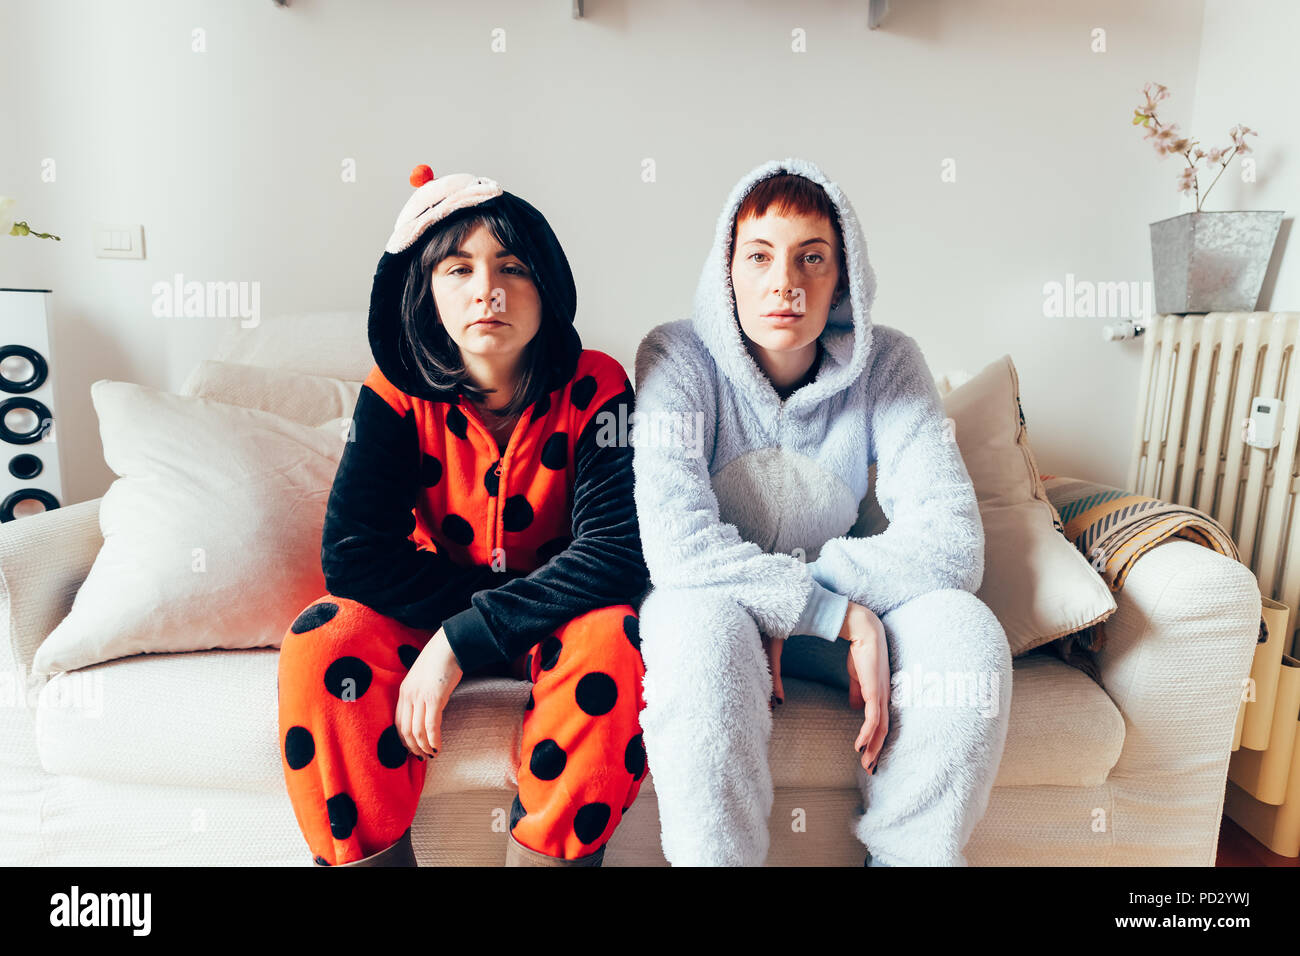 Portrait of women sitting on sofa wearing adult bodysuits looking at camera Stock Photo